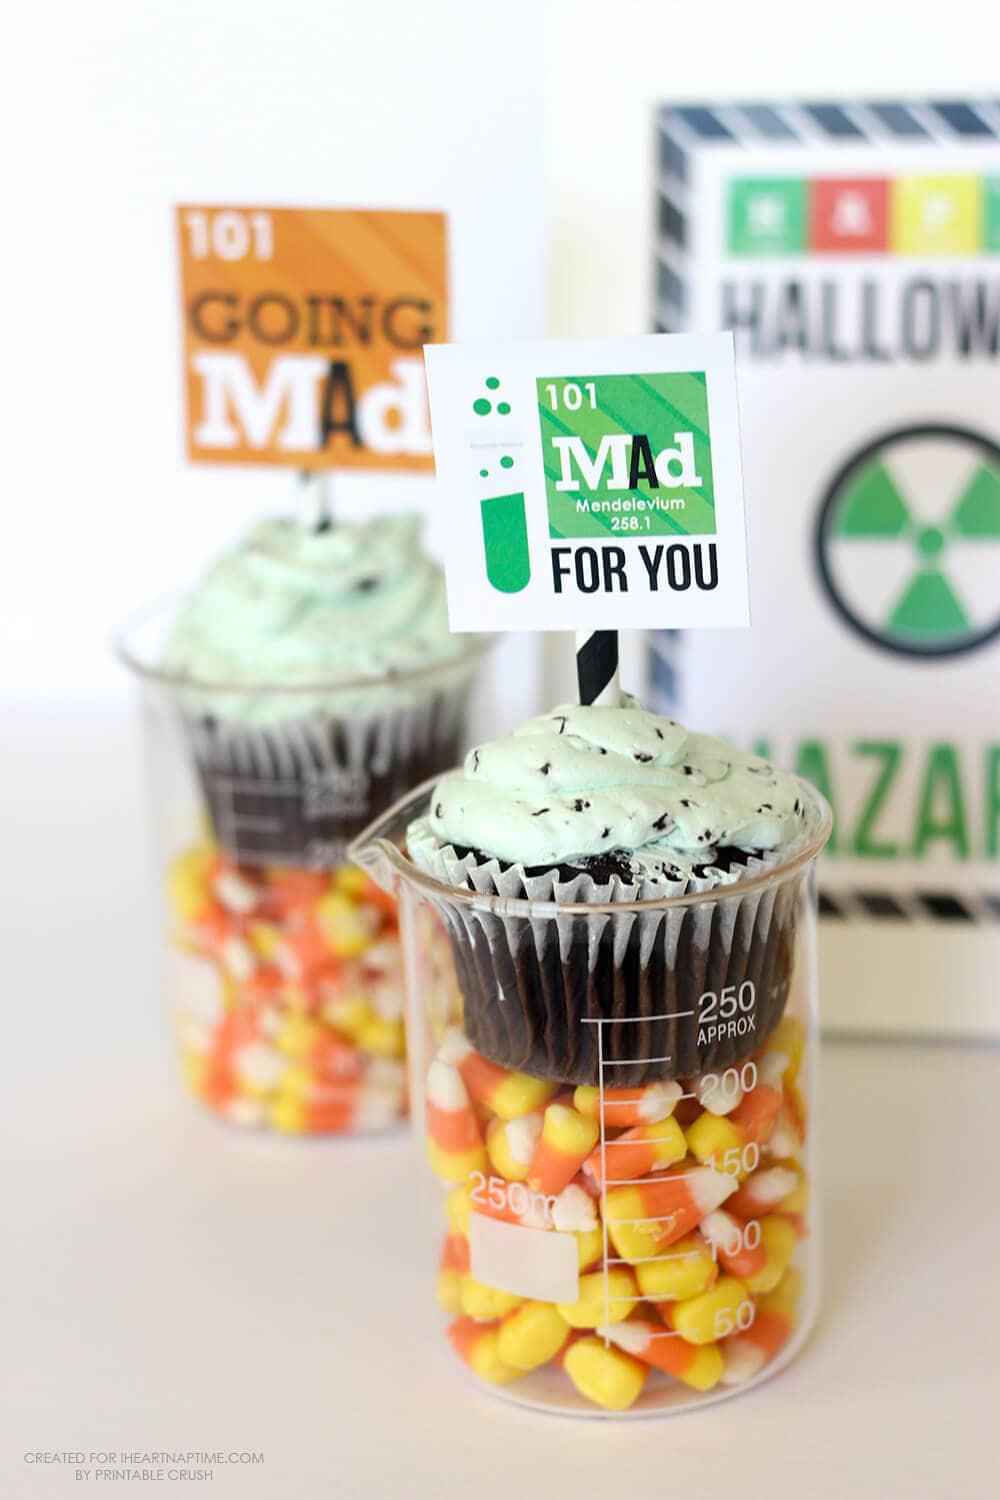 These Mad Scientist Halloween Party Printables are perfect for a little get-together! Grab some beakers and cupcakes to recreate this simple party idea!